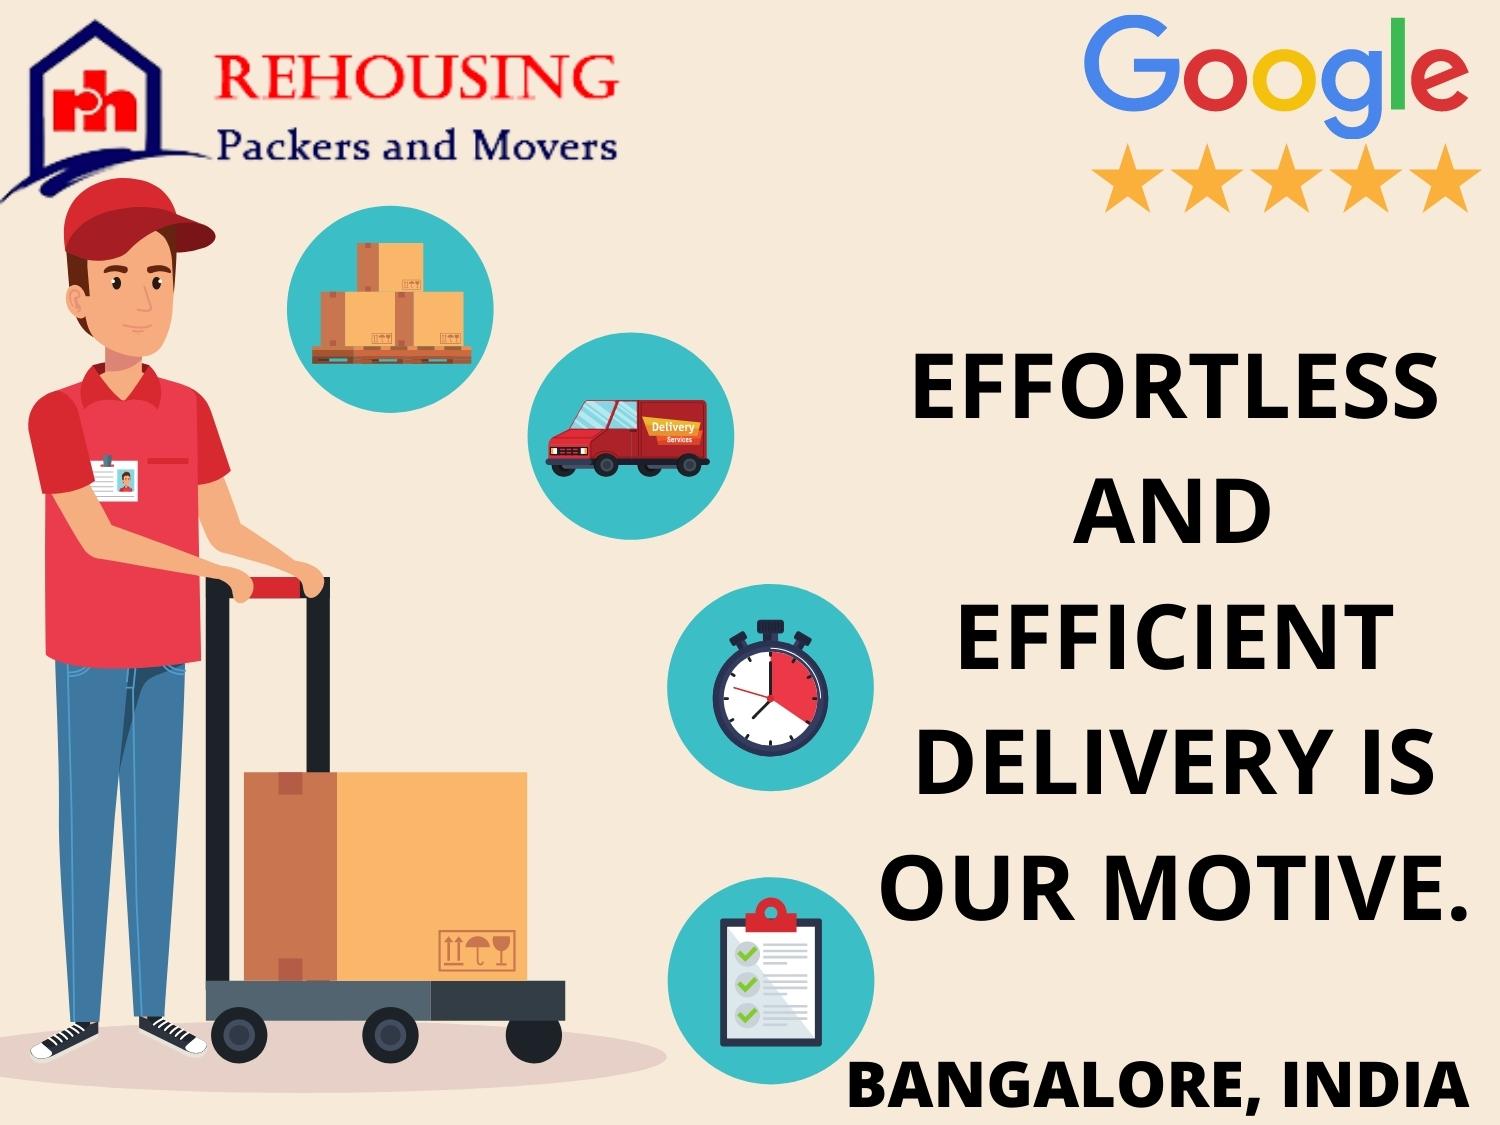 Packers and Movers from Bangalore to Kolkata